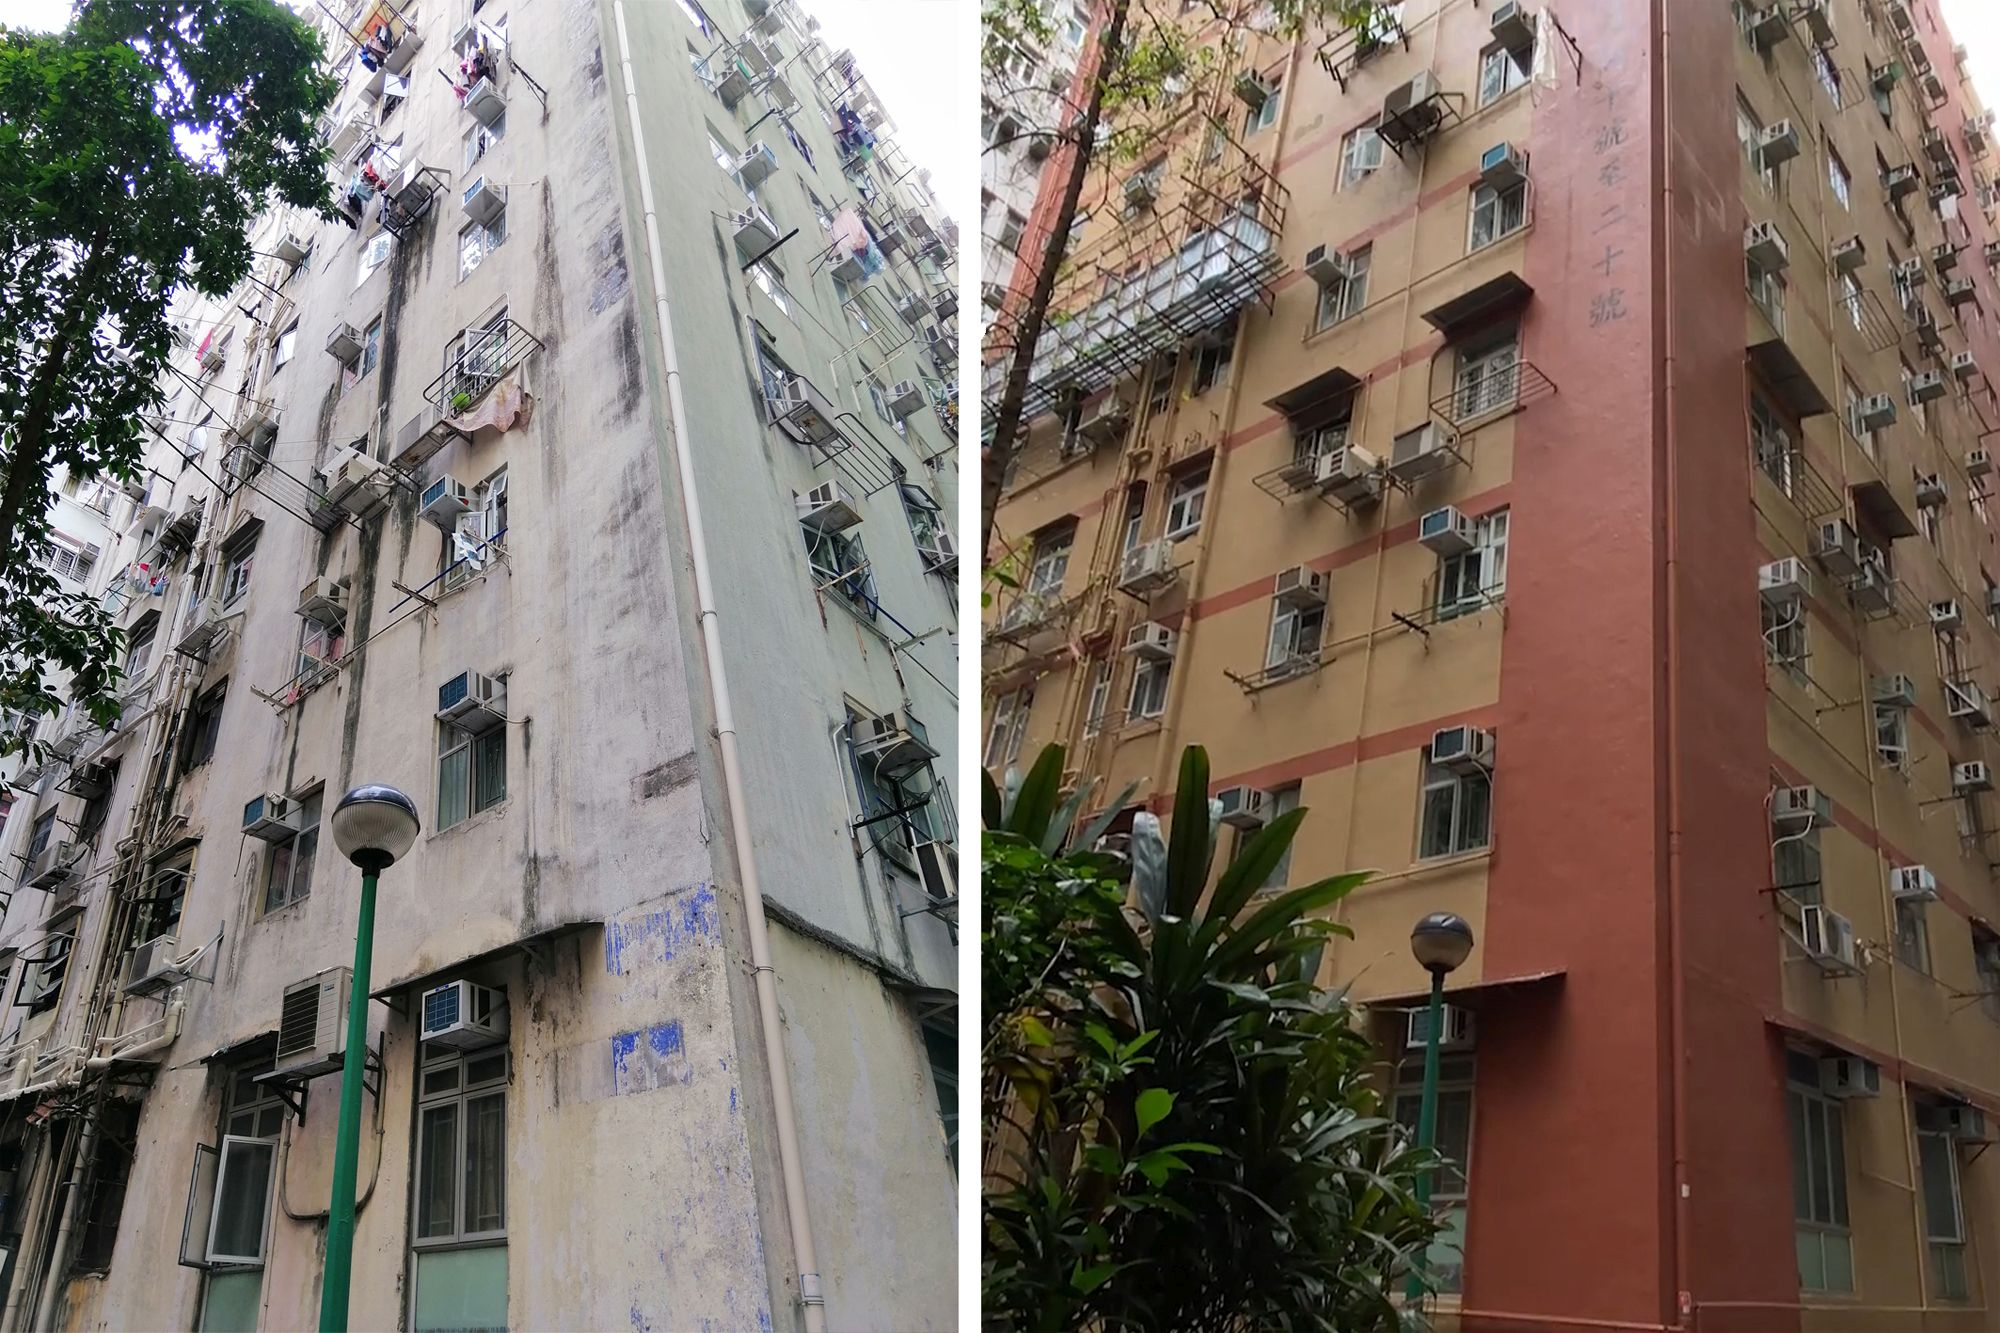 Having participated in the “OBB 2.0”, Kam Ling Court in Western District has taken on a new look with refurbished external walls (photo on the right).